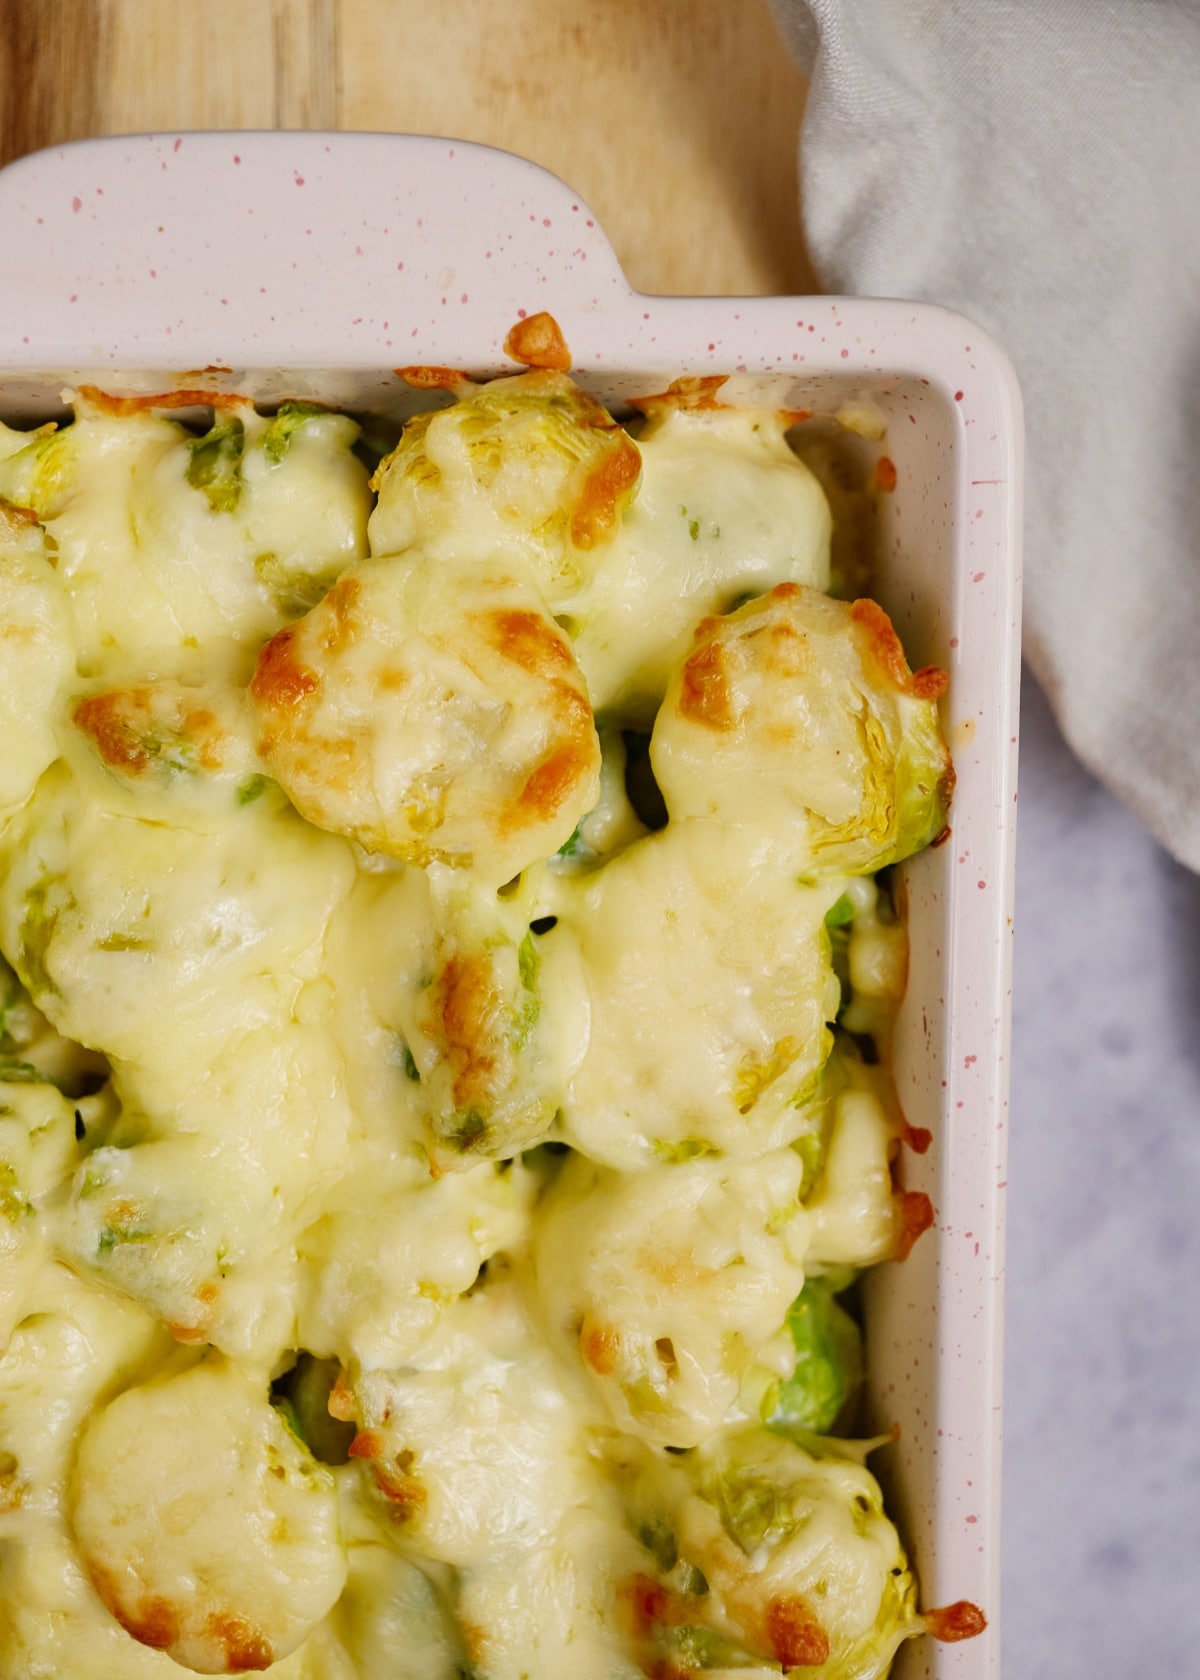 baked creamy brussel sprout casserole in a pink baking dish